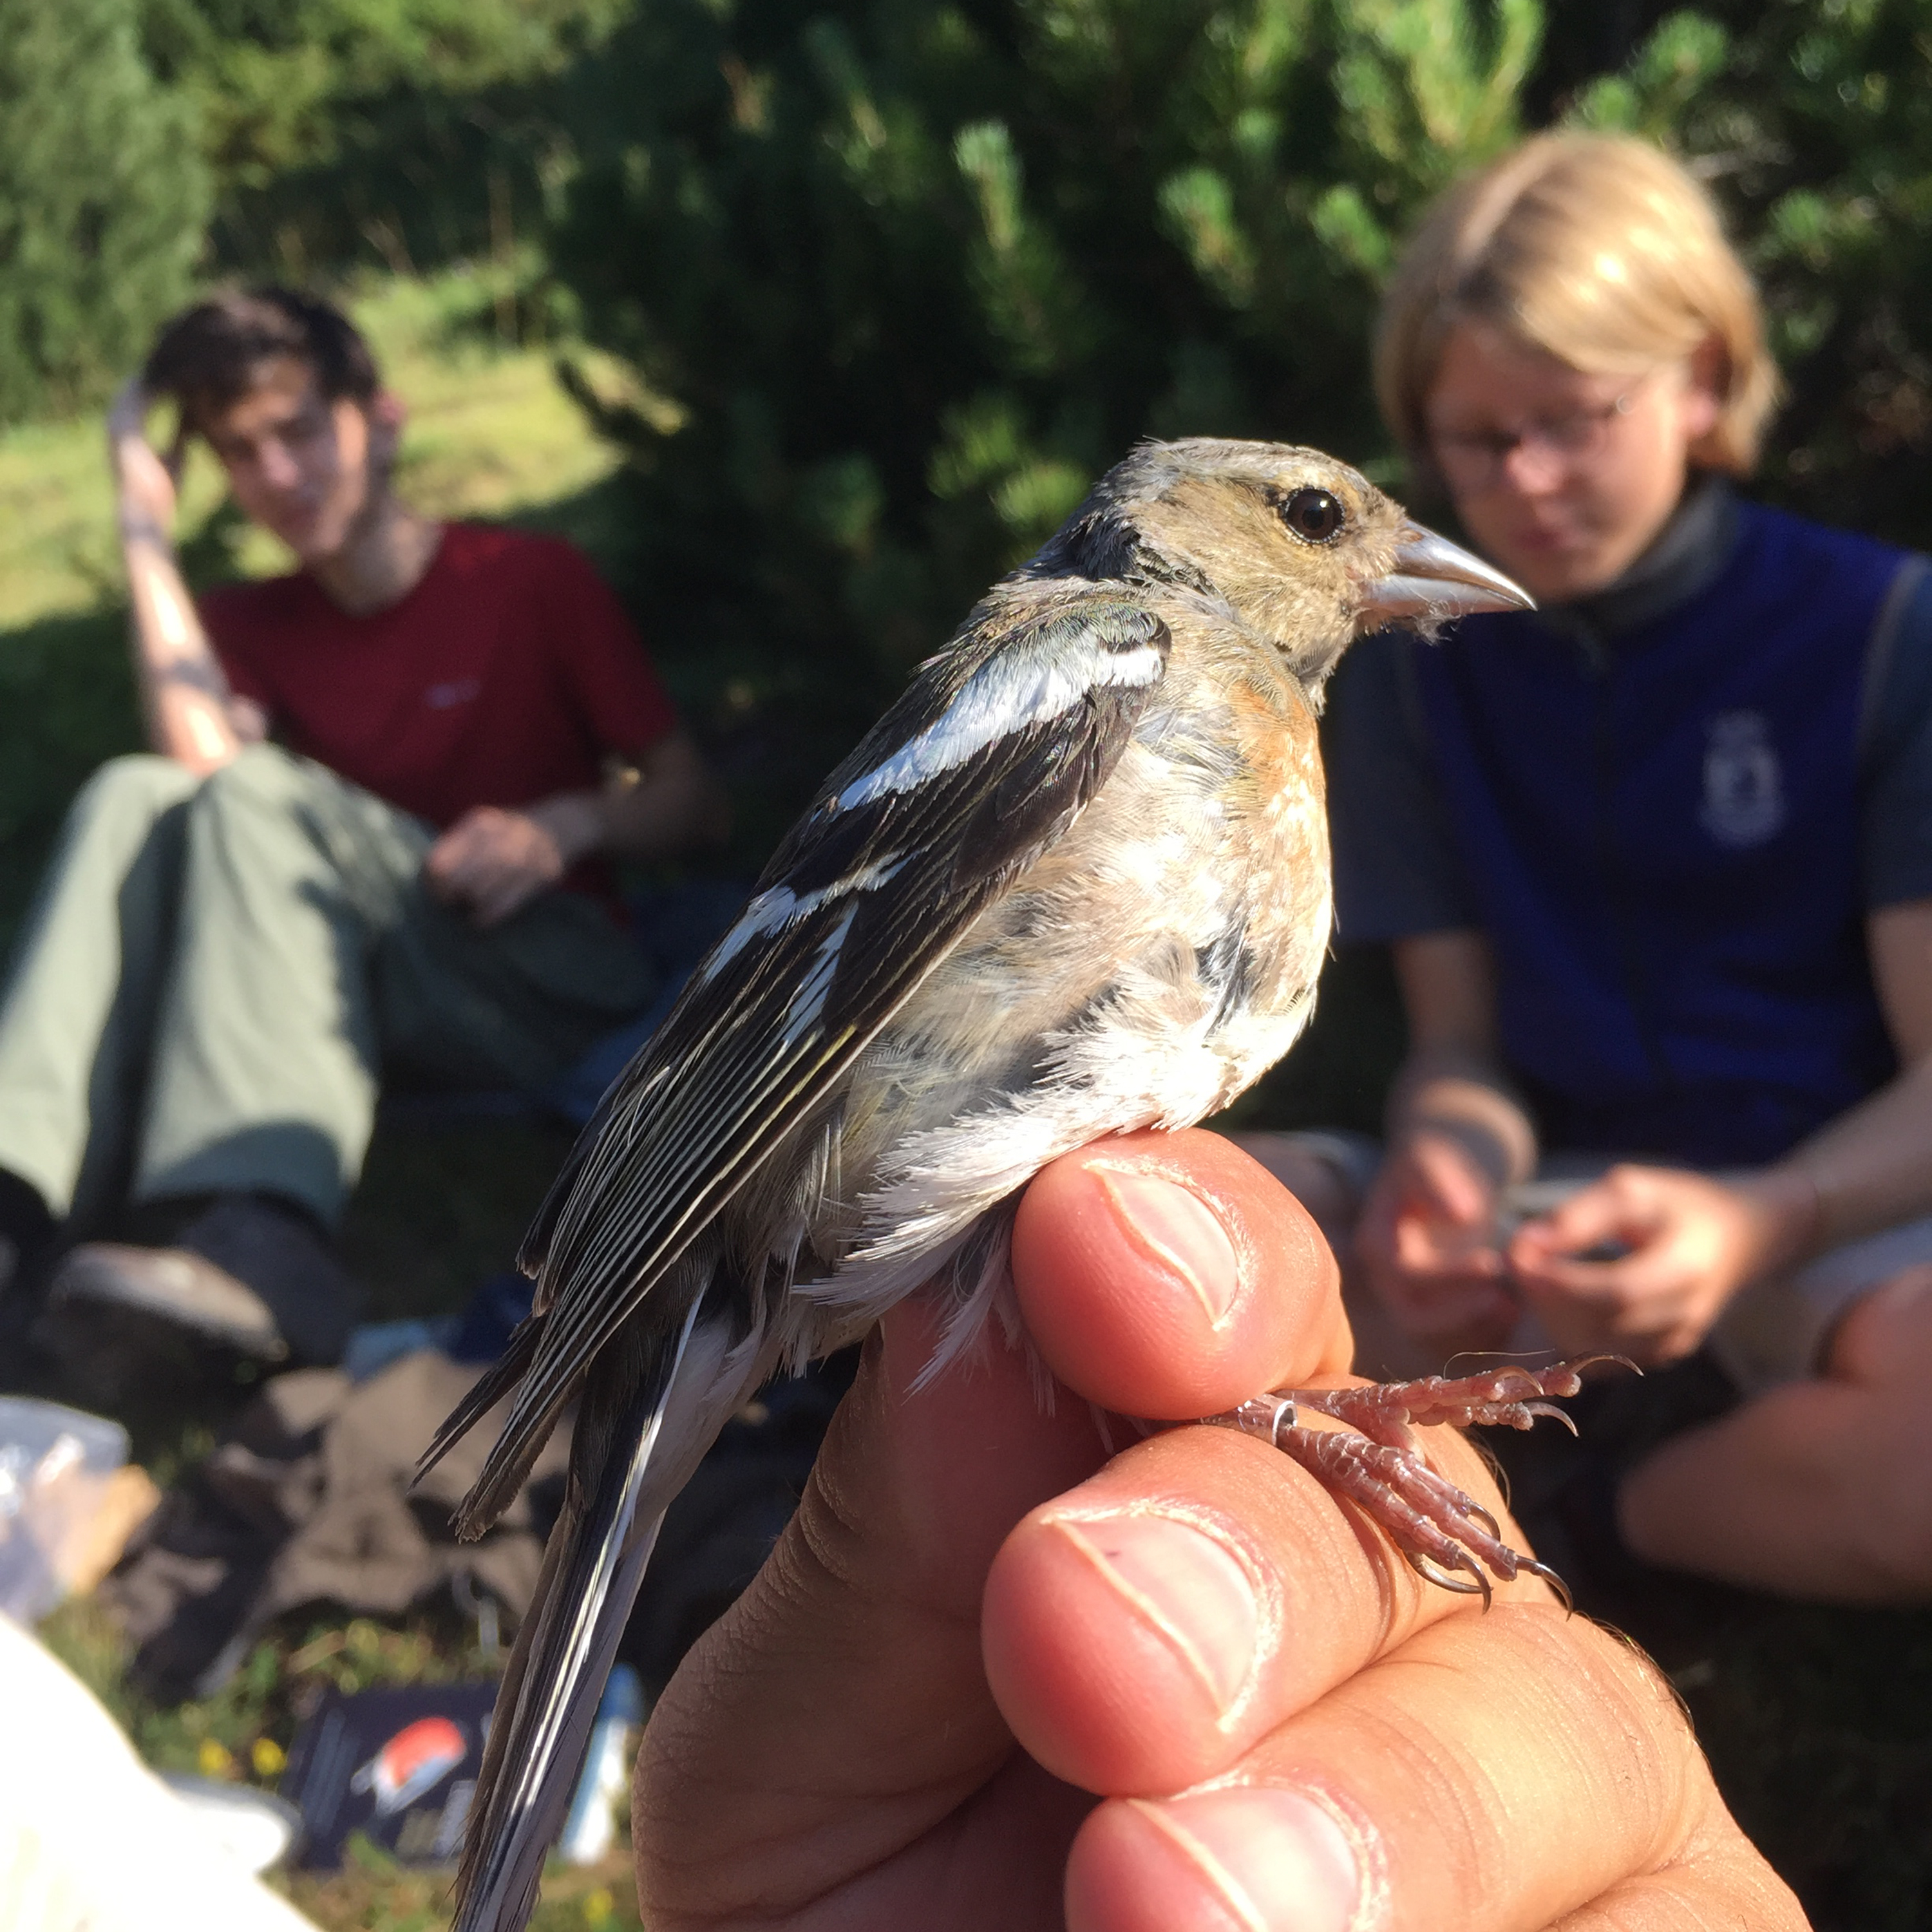 Student groups have a variety of expedition options including hiking the Andorran Pyrenees searching for signs of climate-related stress in birds and other wildlife.